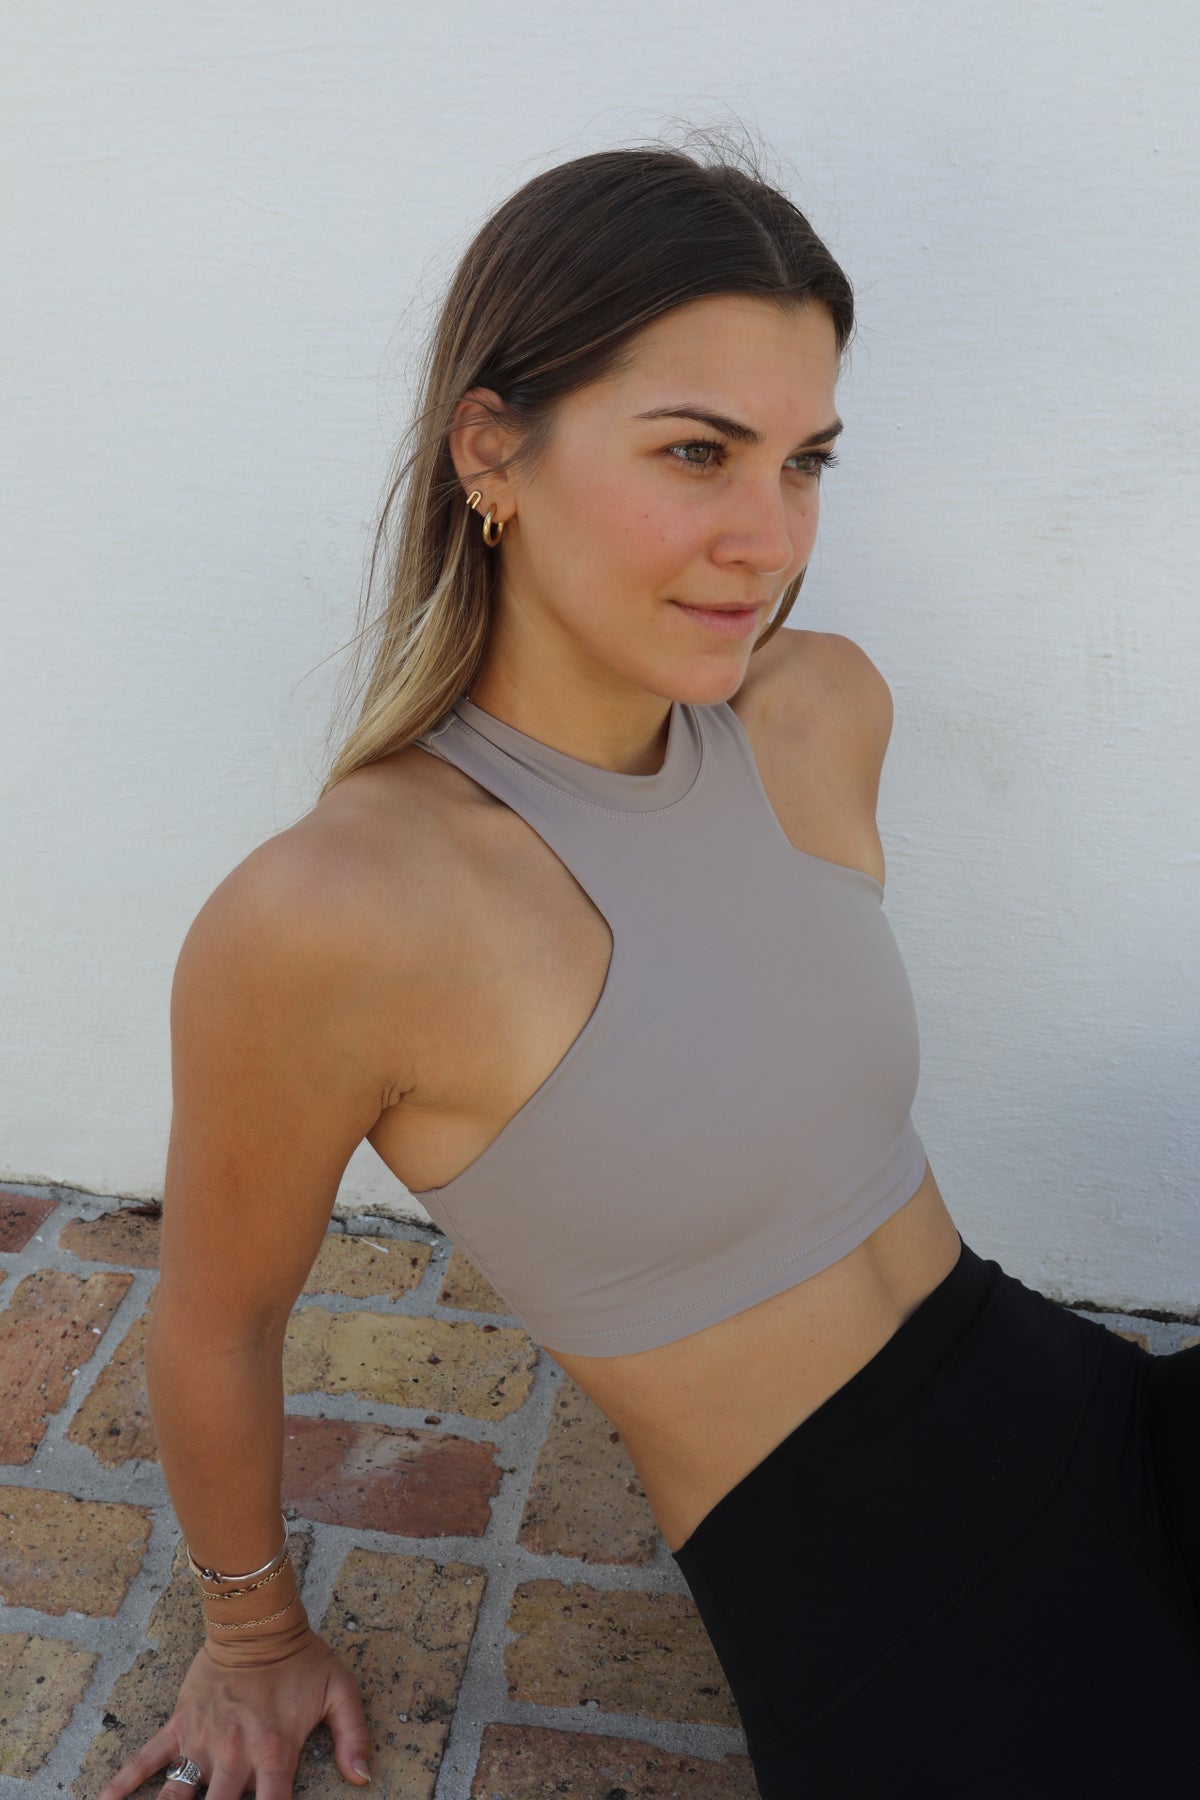 the Rise Above sports bra – Femme Royale